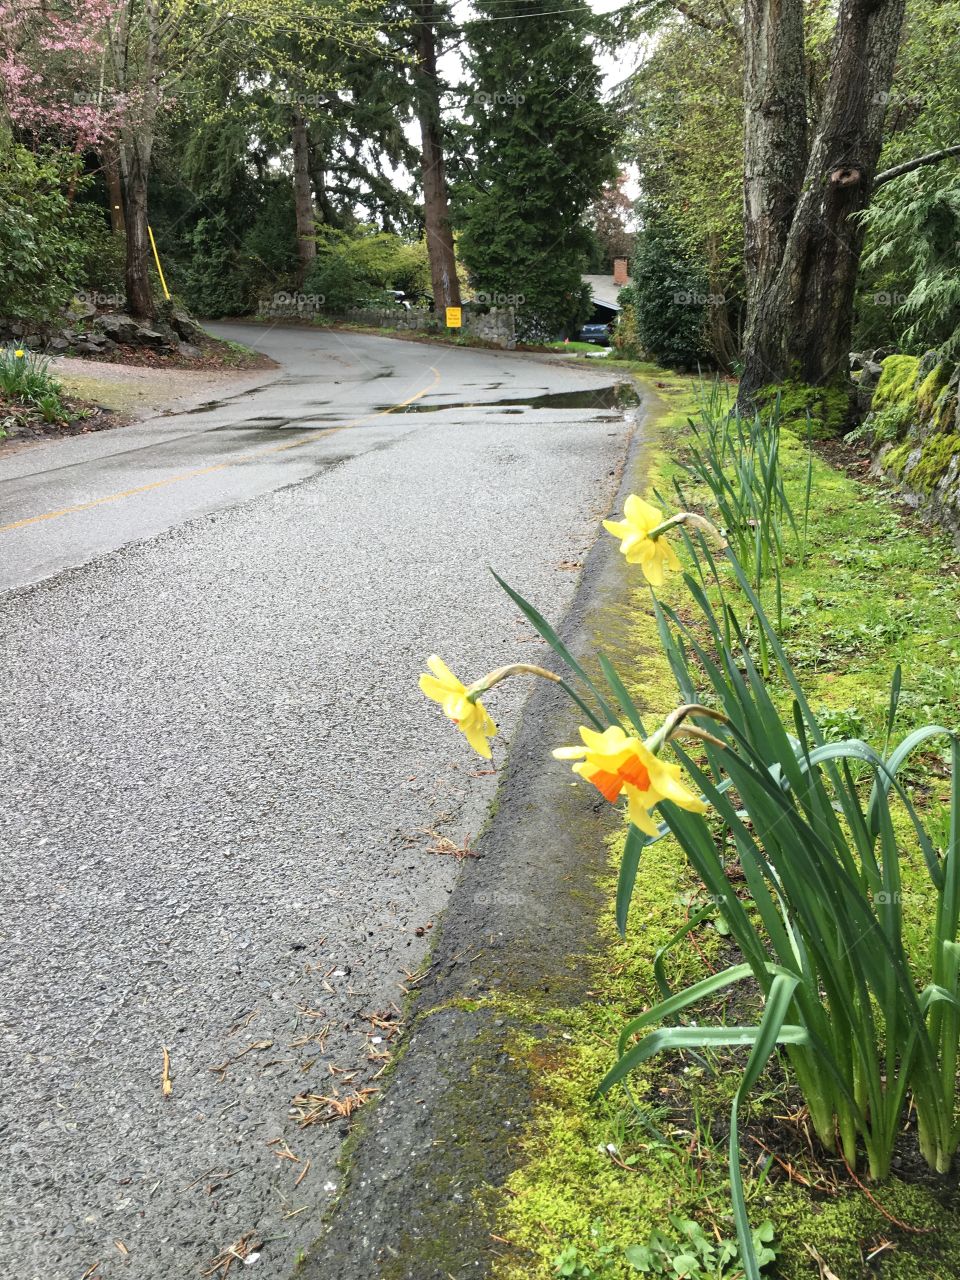 Daffodils by the road